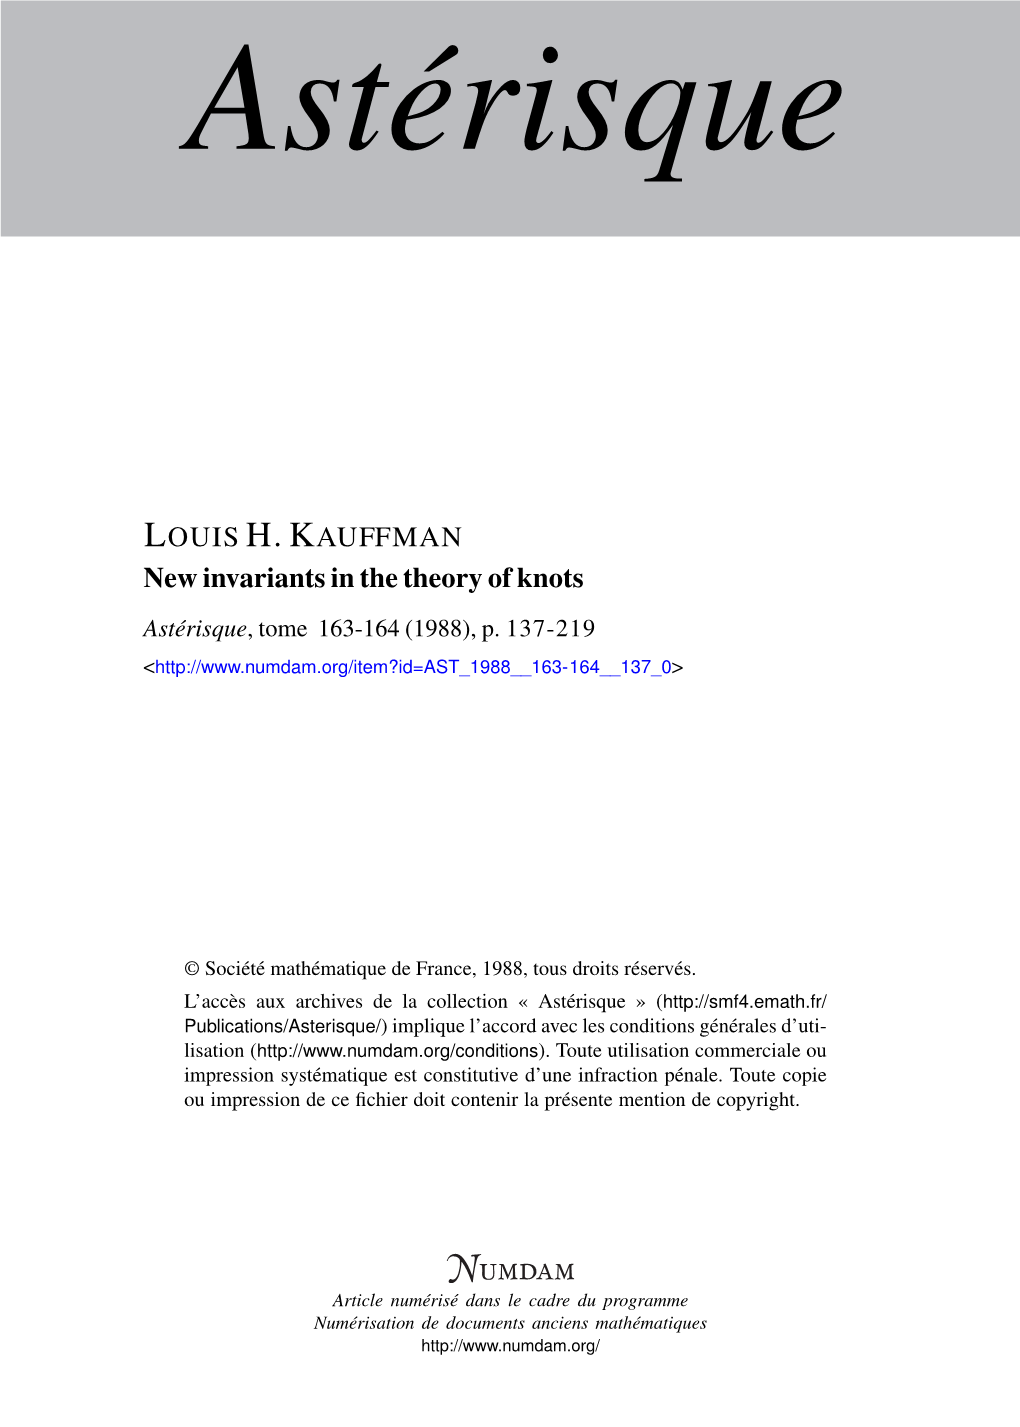 New Invariants in the Theory of Knots Astérisque, Tome 163-164 (1988), P